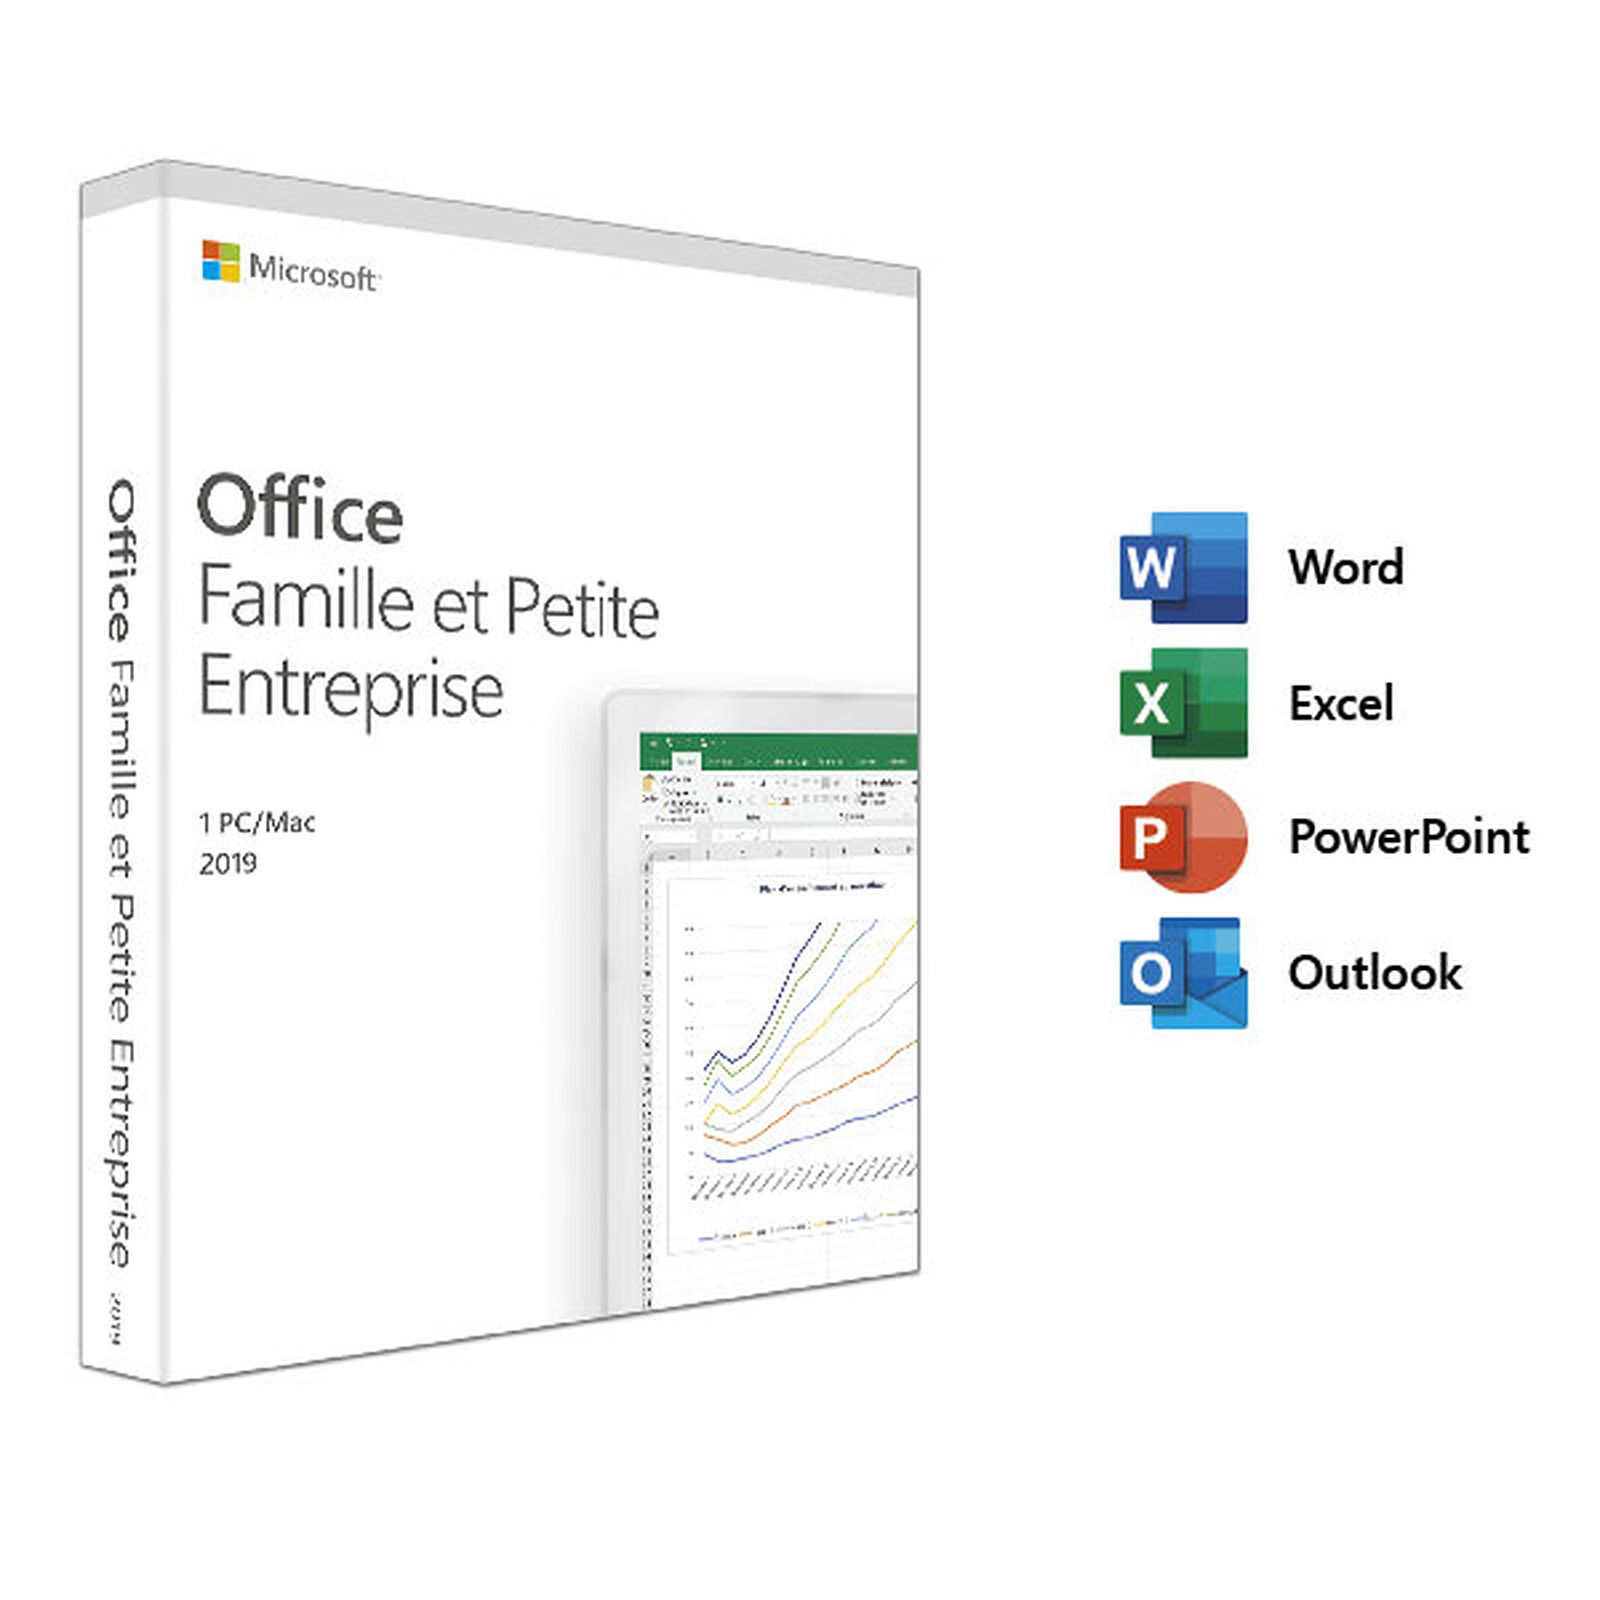 i want to purchase microsoft office for mac